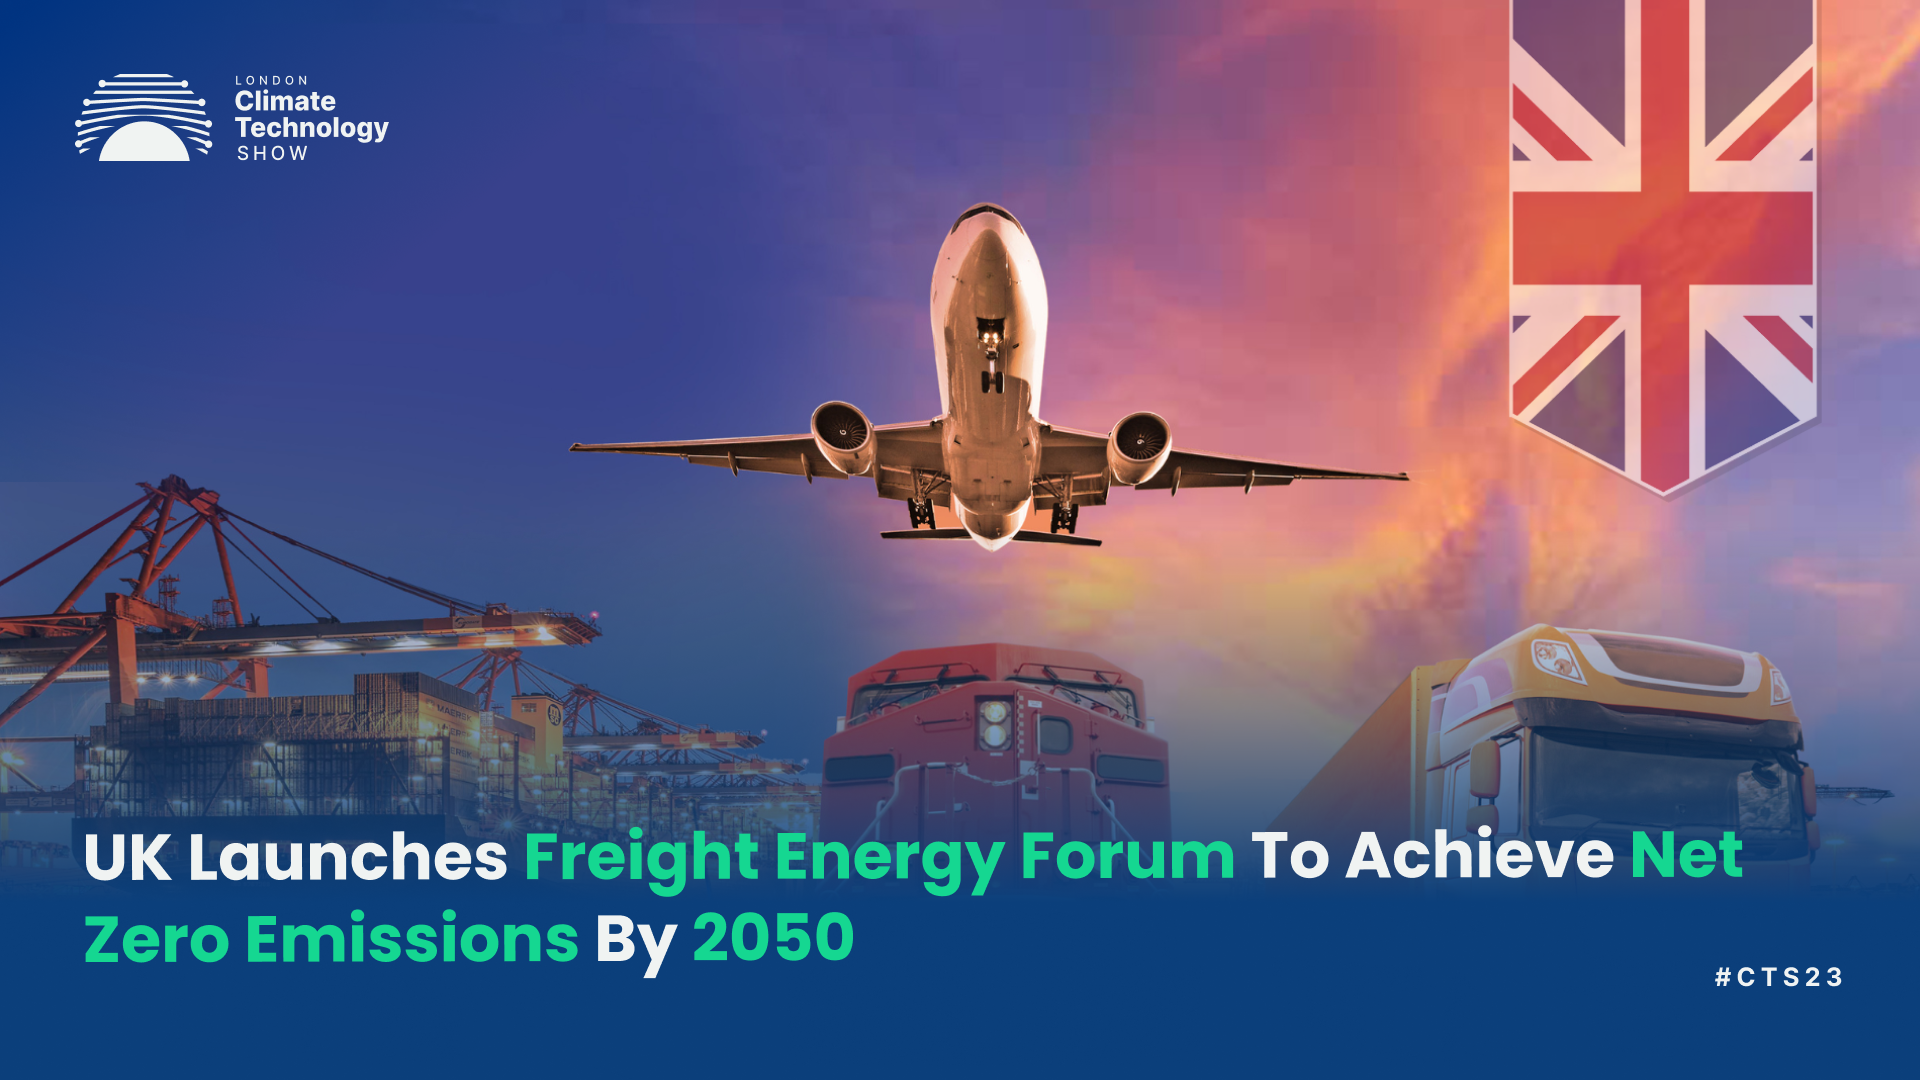 UK Launches Freight Energy Forum To Achieve Net Zero Emissions By 2050